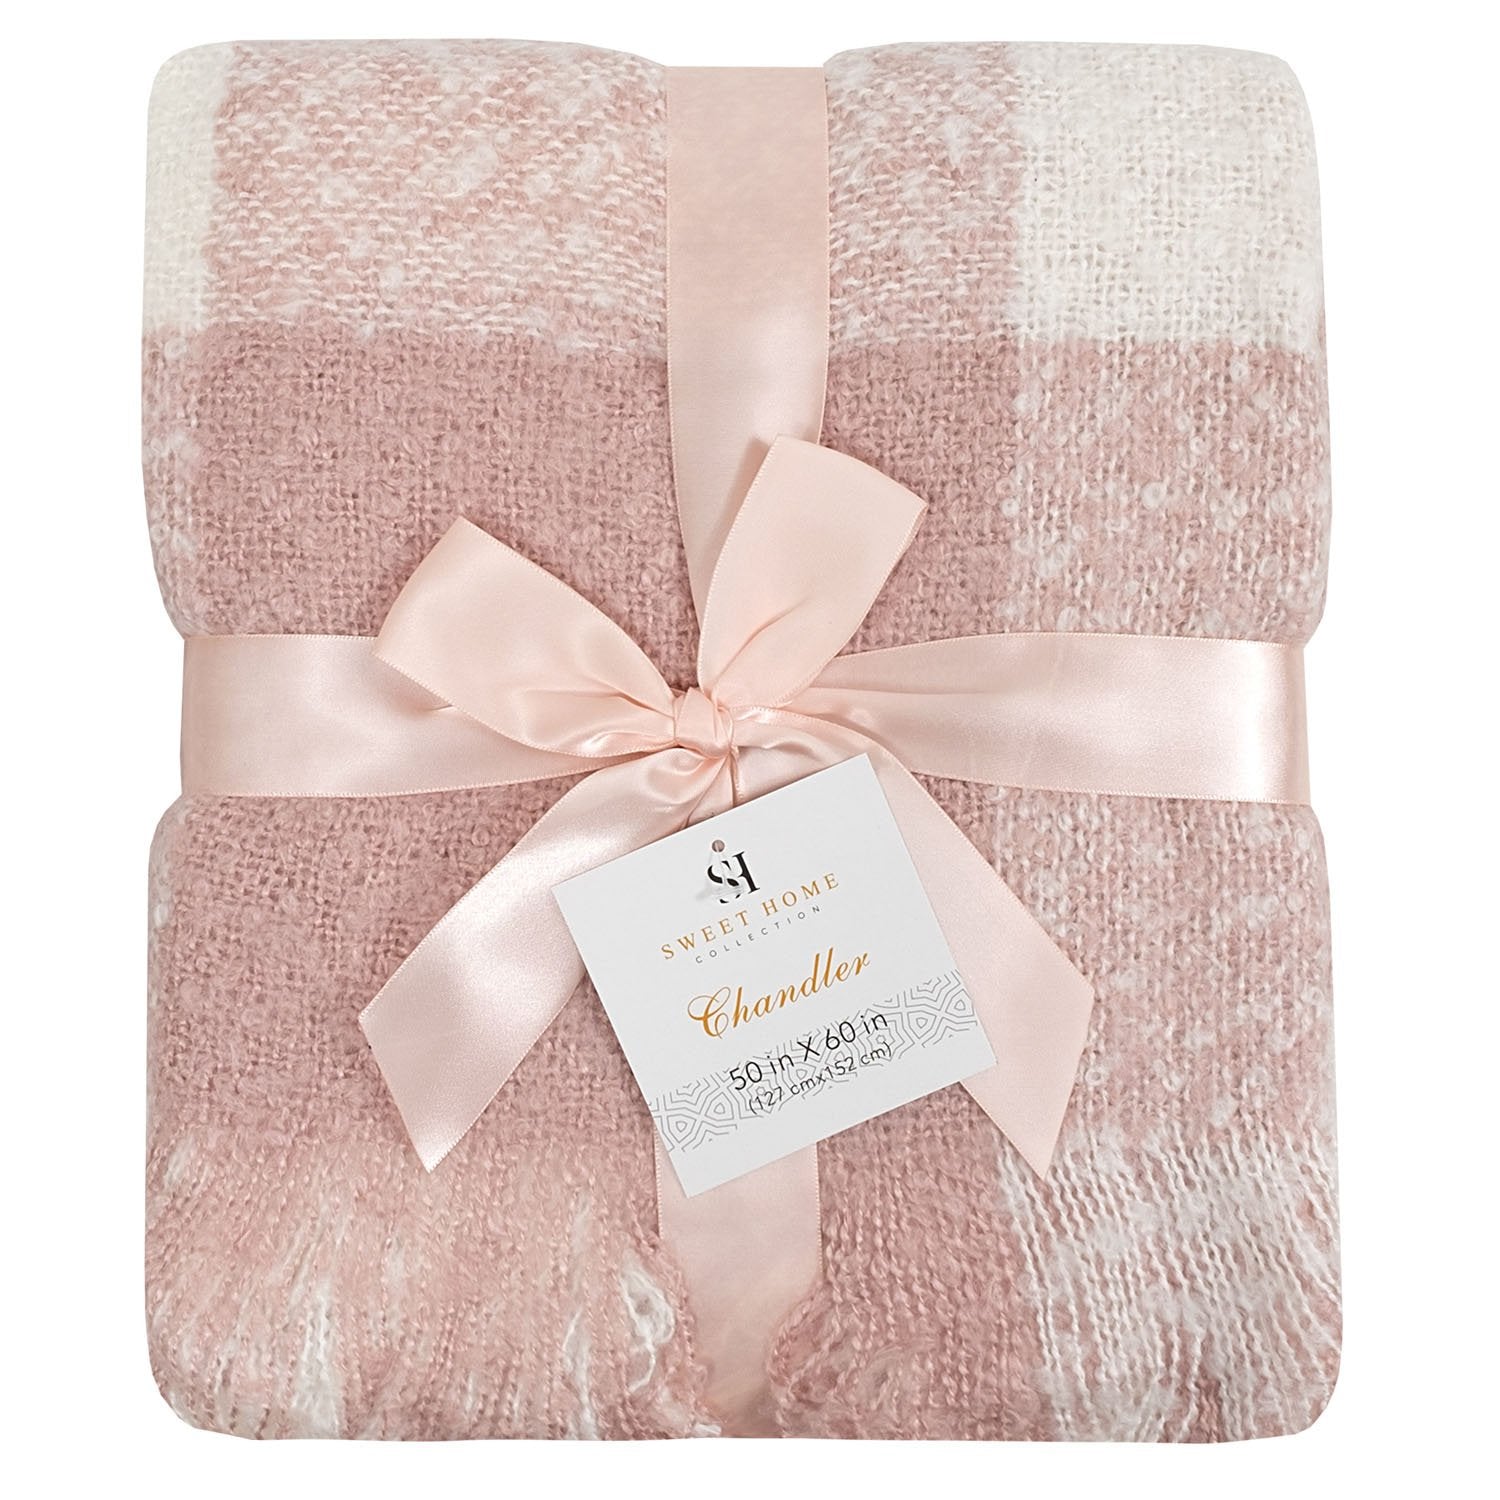 Chandler Buffalo Check Throw Blanket Pink Ivory - Folded 2